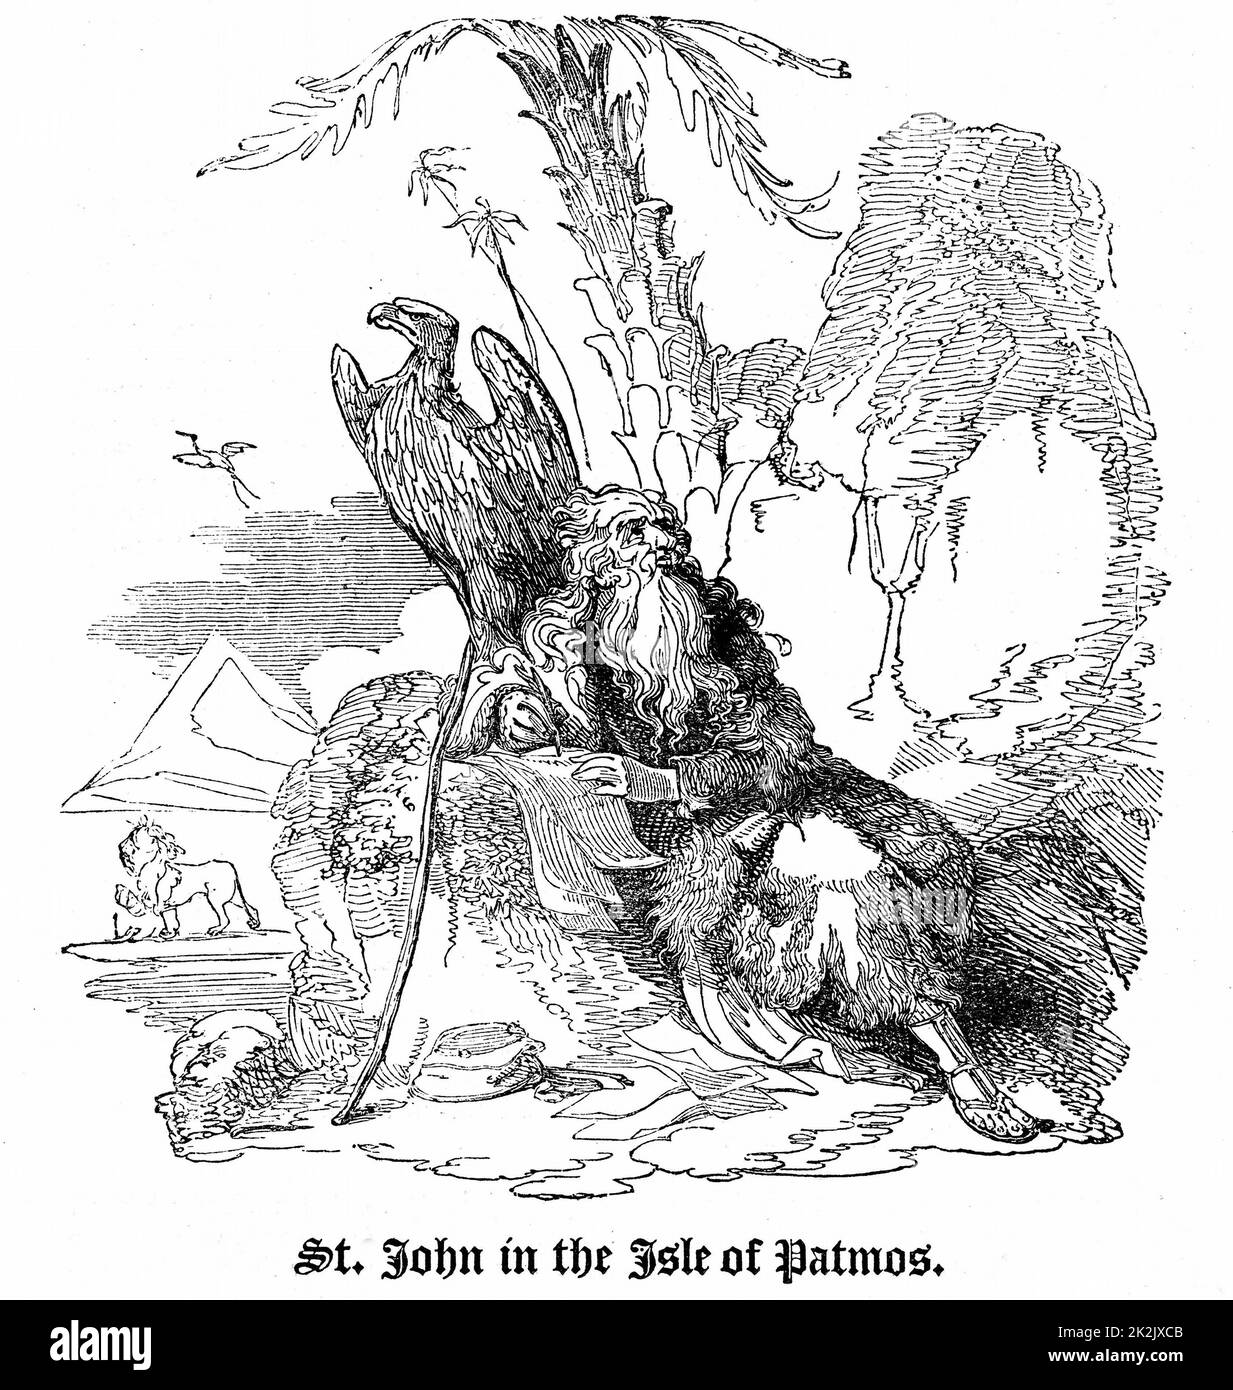 St John the Apostle (Evangelist) in exile on Isle of Patmos, having been accused of being a magician. Perched behind him is an eagle, his symbol. Woodcut, London 1826 Stock Photo